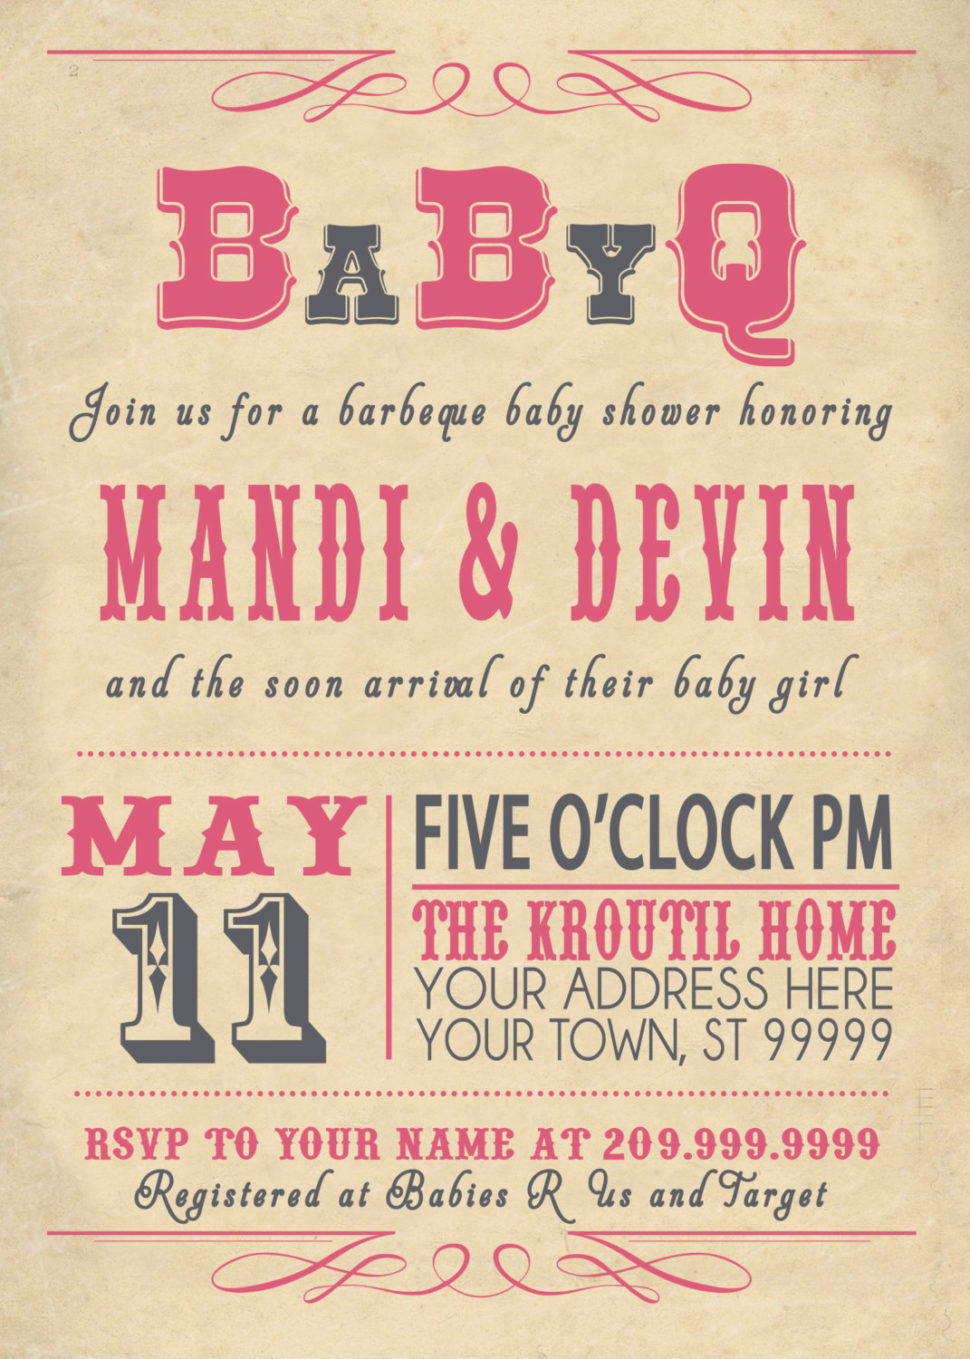 Medium Size of Baby Shower:delightful Baby Shower Invitation Wording Picture Designs Cheap Baby Shower Favors With Baby Boy Shower Favors Plus Baby Shower Outfit Guest Together With Cheap Baby Shower Gifts As Well As How To Plan A Baby Shower And Baby Shower Images